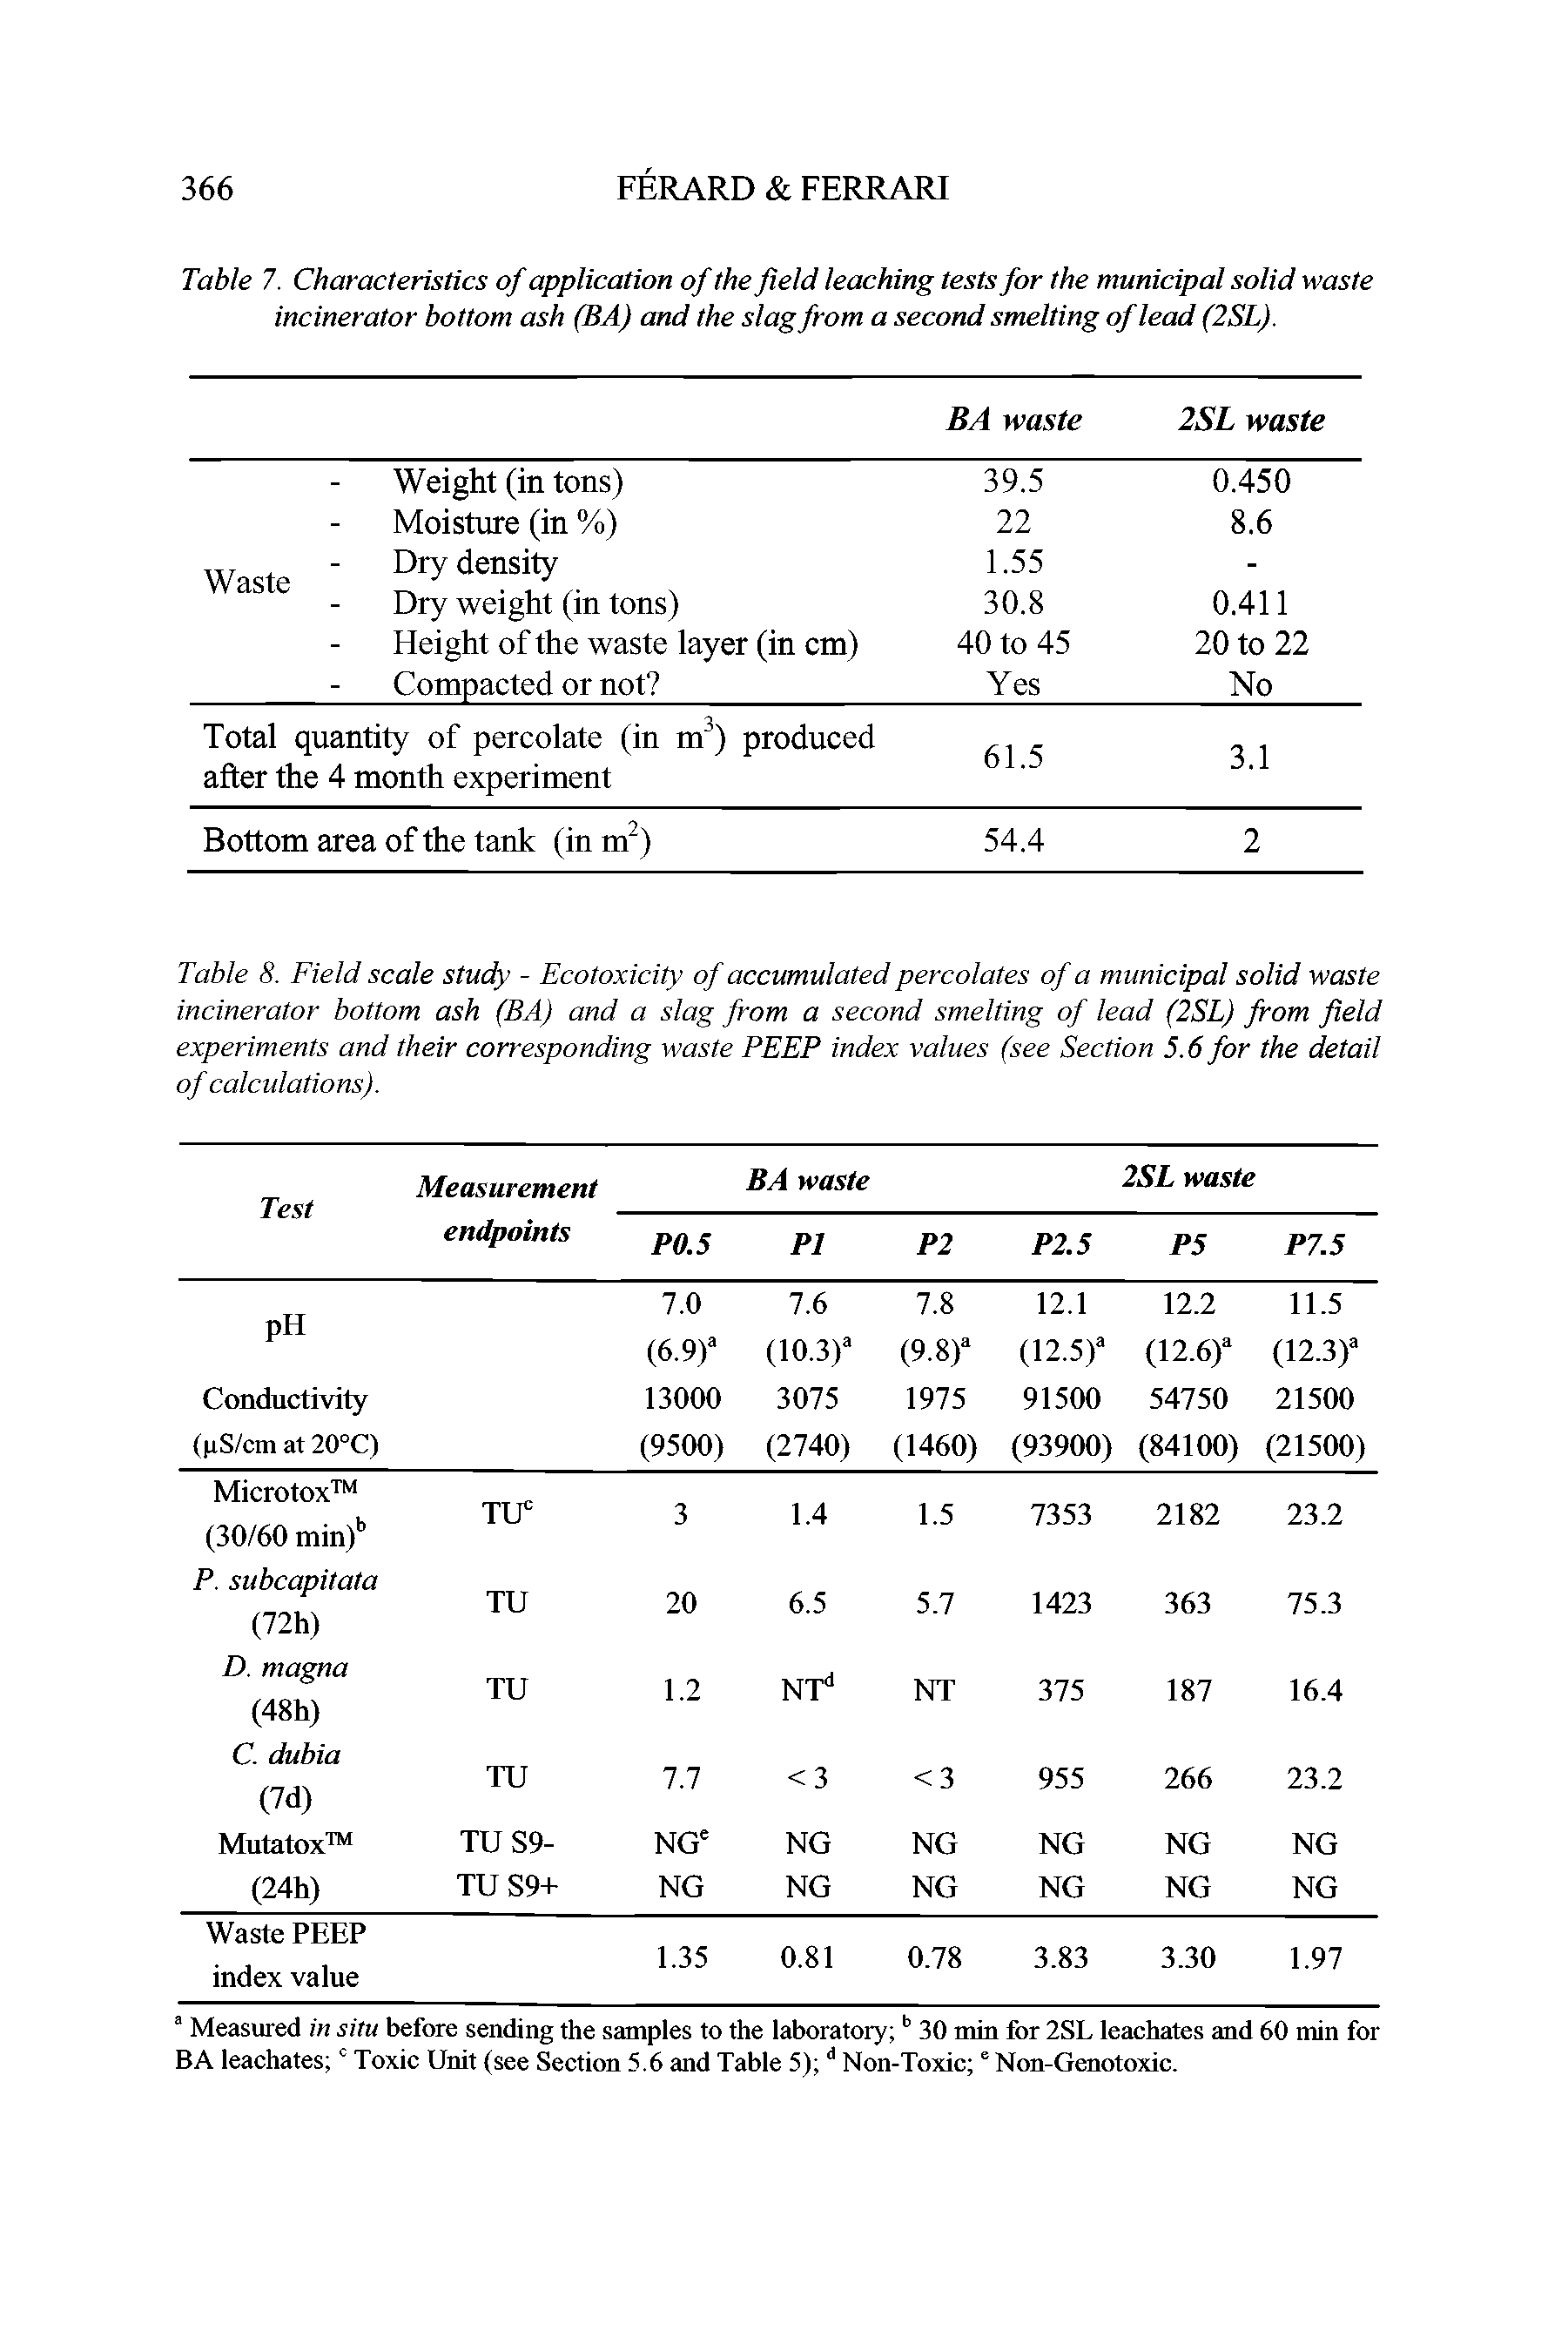 Table 7. Characteristics of application of the field leaching tests for the municipal solid waste incinerator bottom ash (BA) and the slag from a second smelting of lead (2SL).